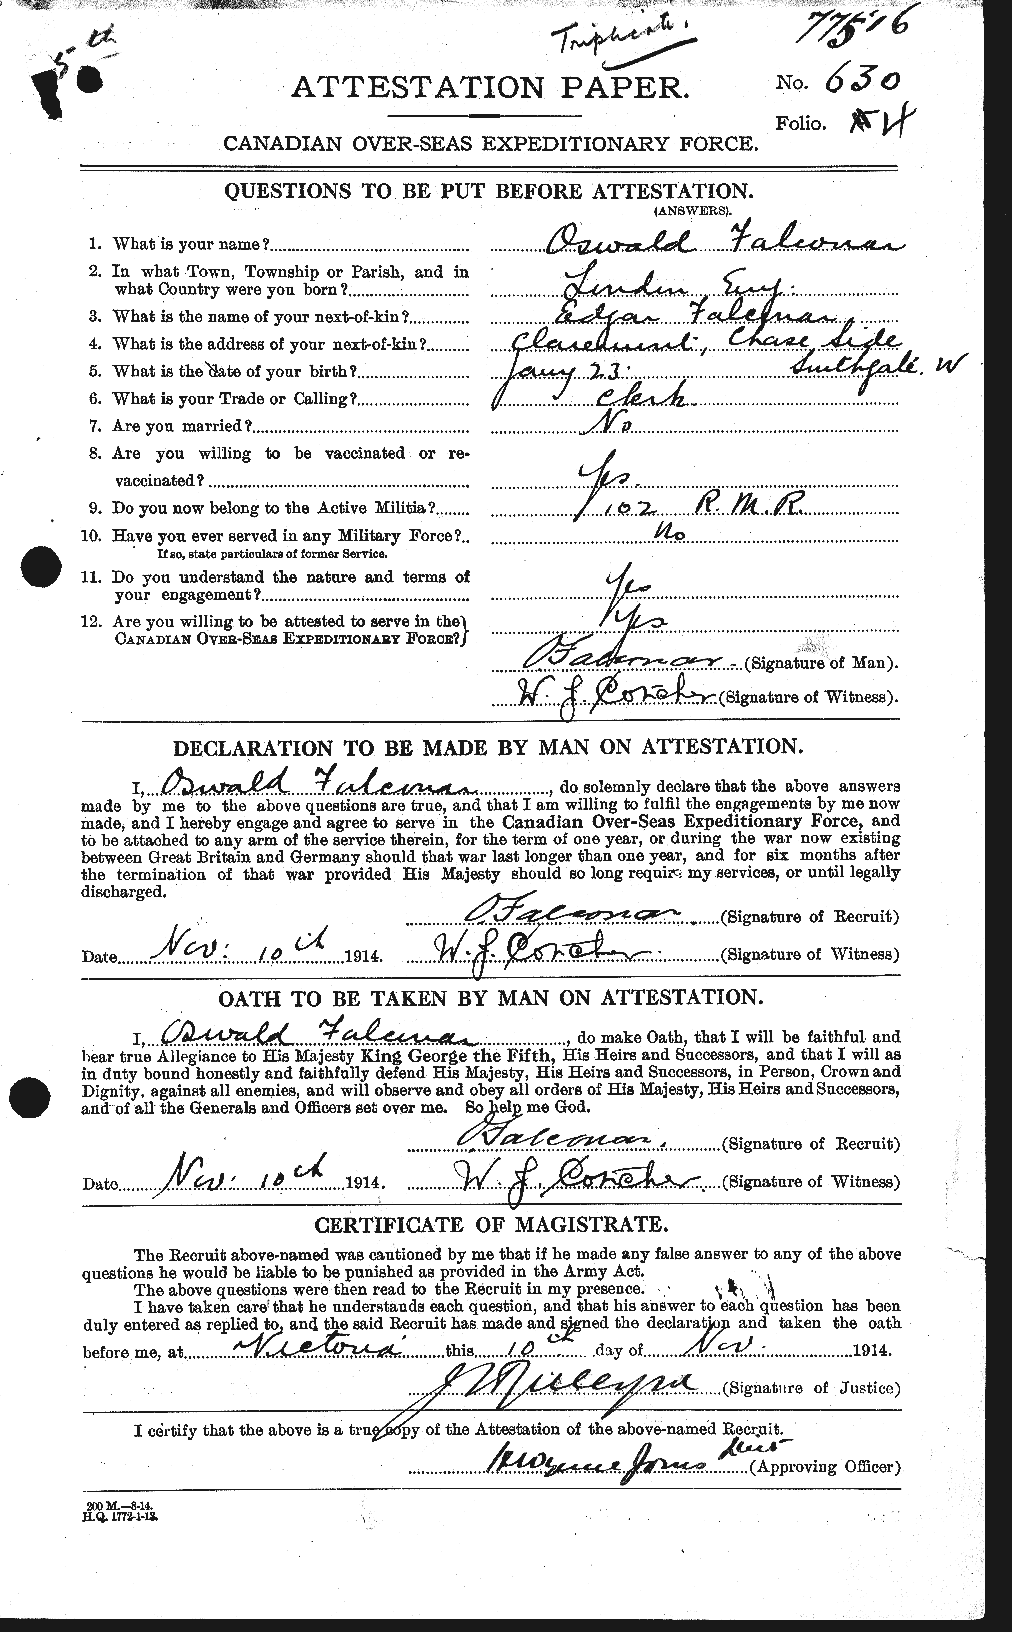 Personnel Records of the First World War - CEF 316999a